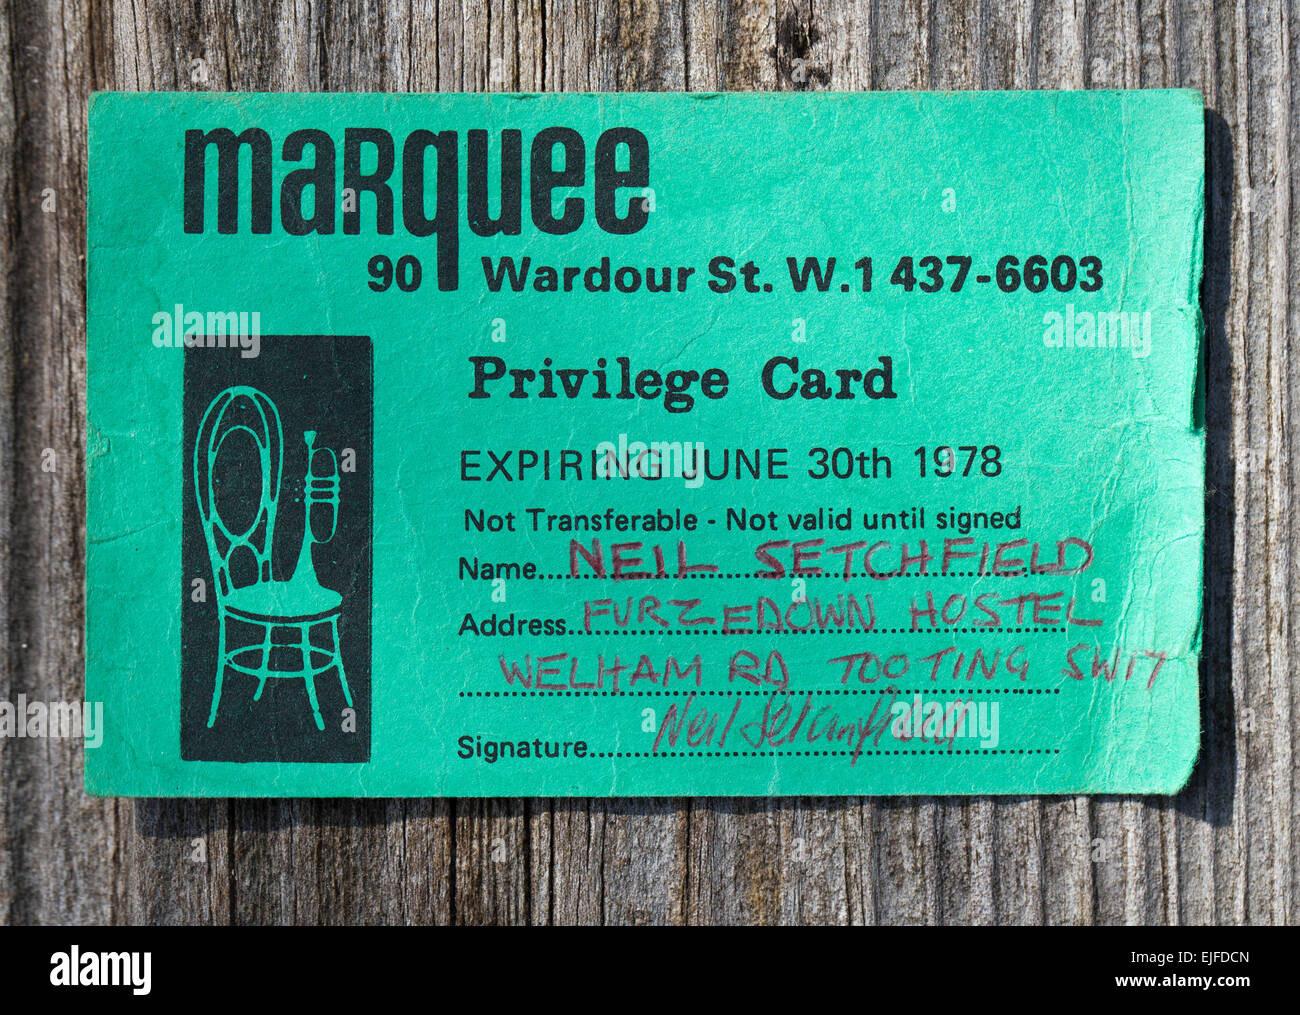 Vintage Privilege Membership card for the Marquee Club Wardour Street London Stock Photo